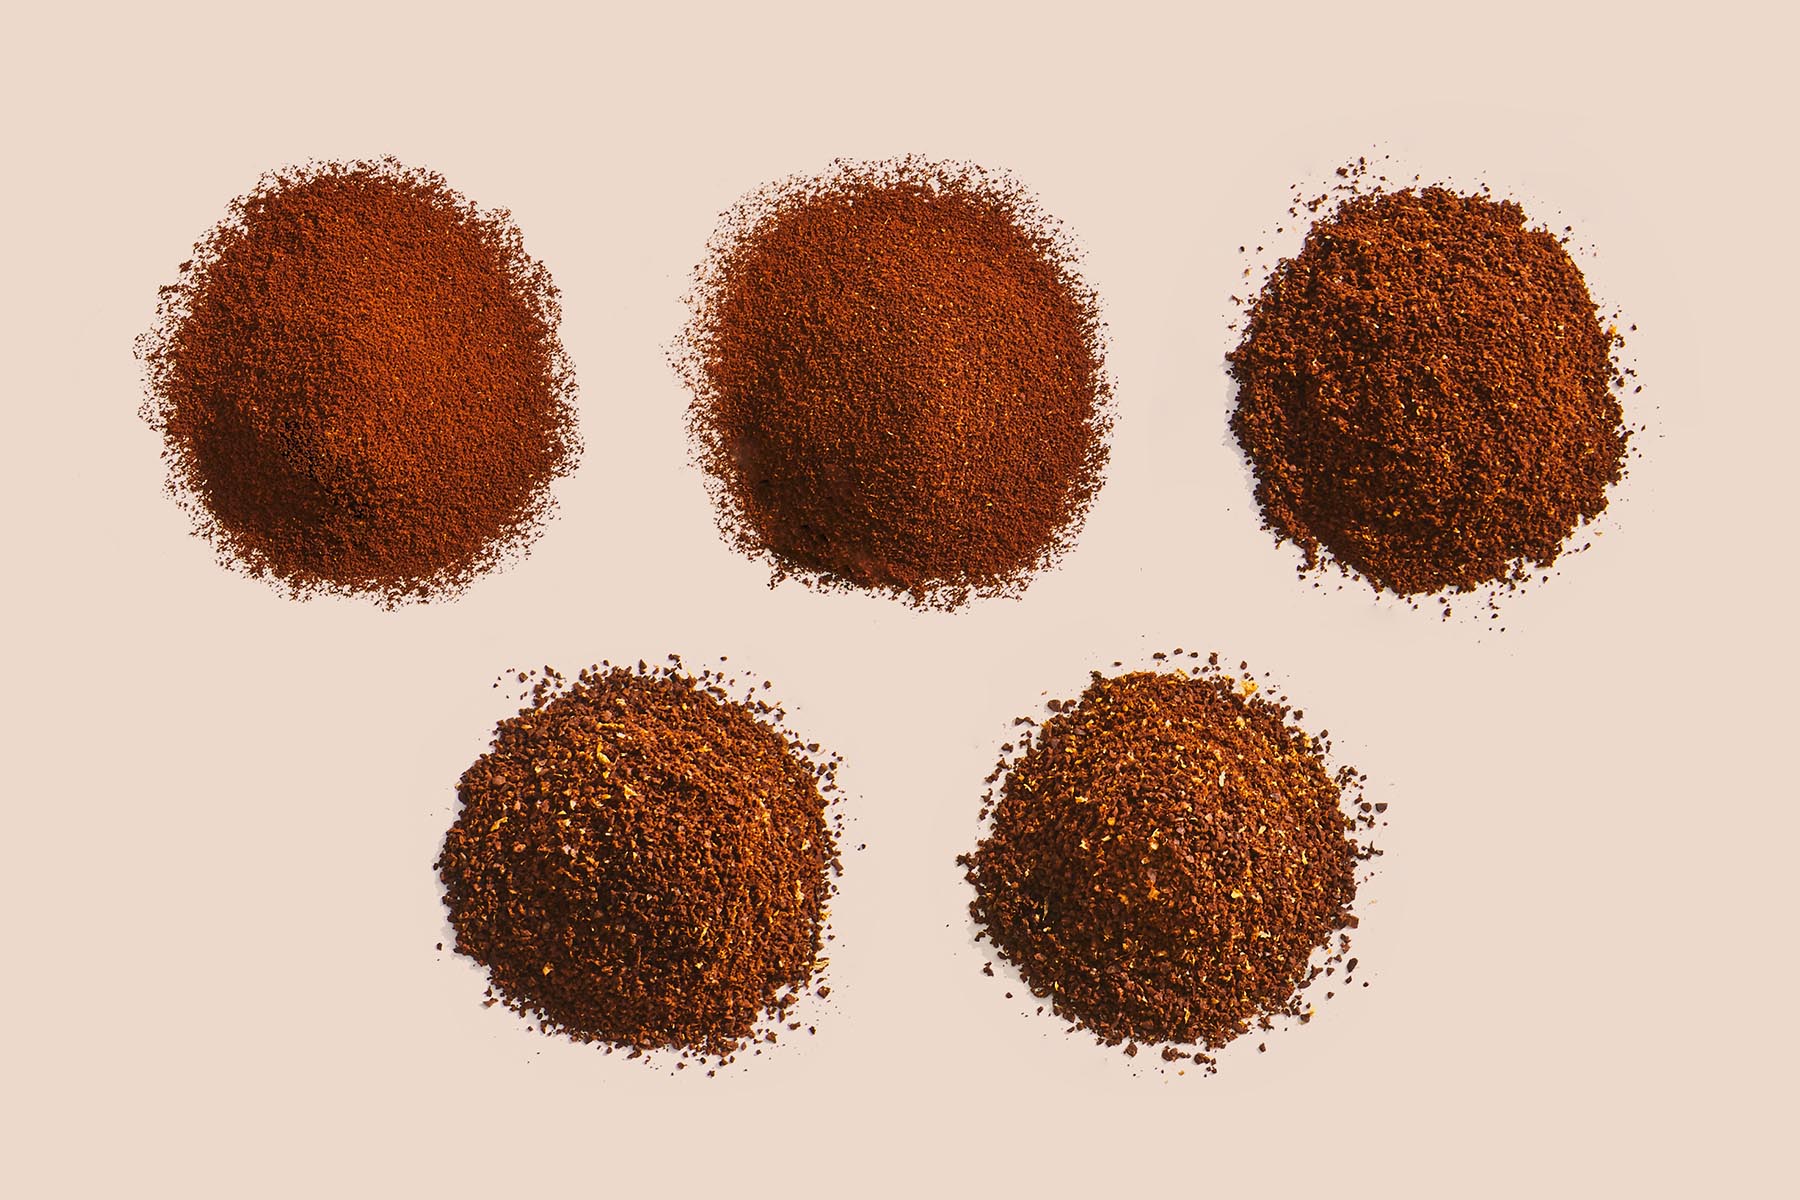 Coffee Grinder Coarse Vs. Fine: What Grind Is The Best?